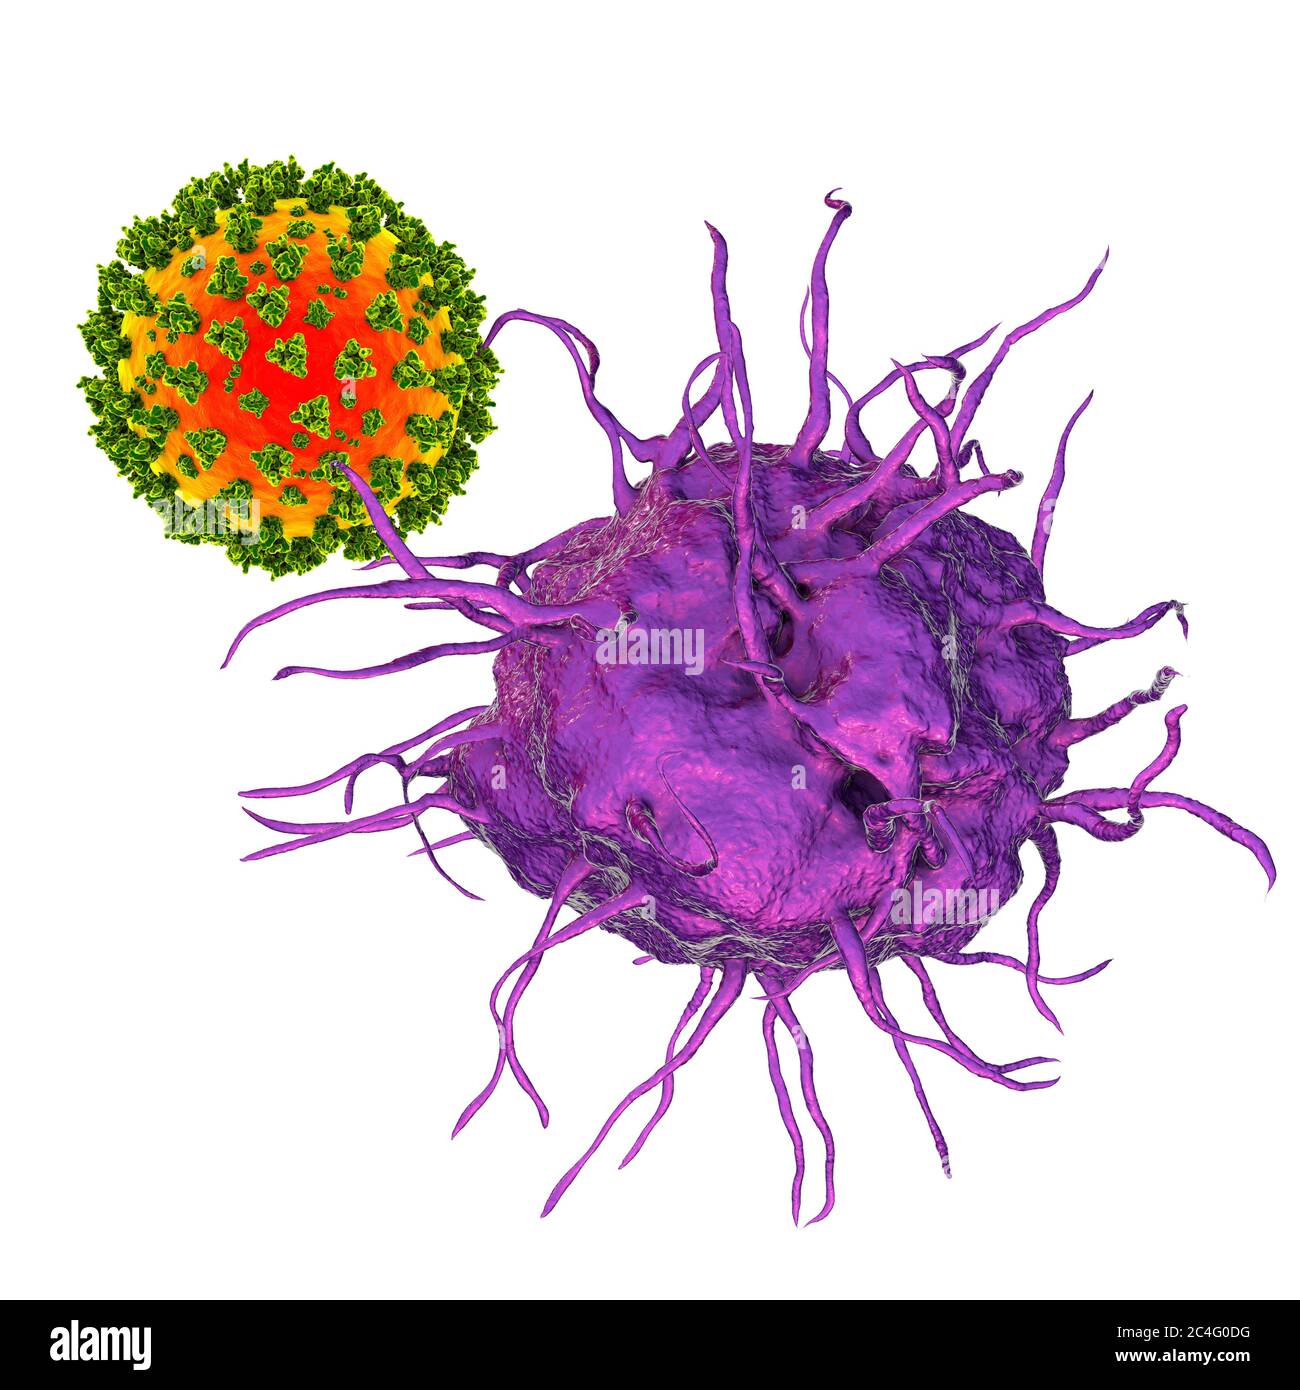 Interaction between virus and dendritic cell, computer illustration. Dendritic cells play a crucial role in initiating immune responses against viruses. They recognise incoming viruses and present their antigens to T cells. Stock Photo